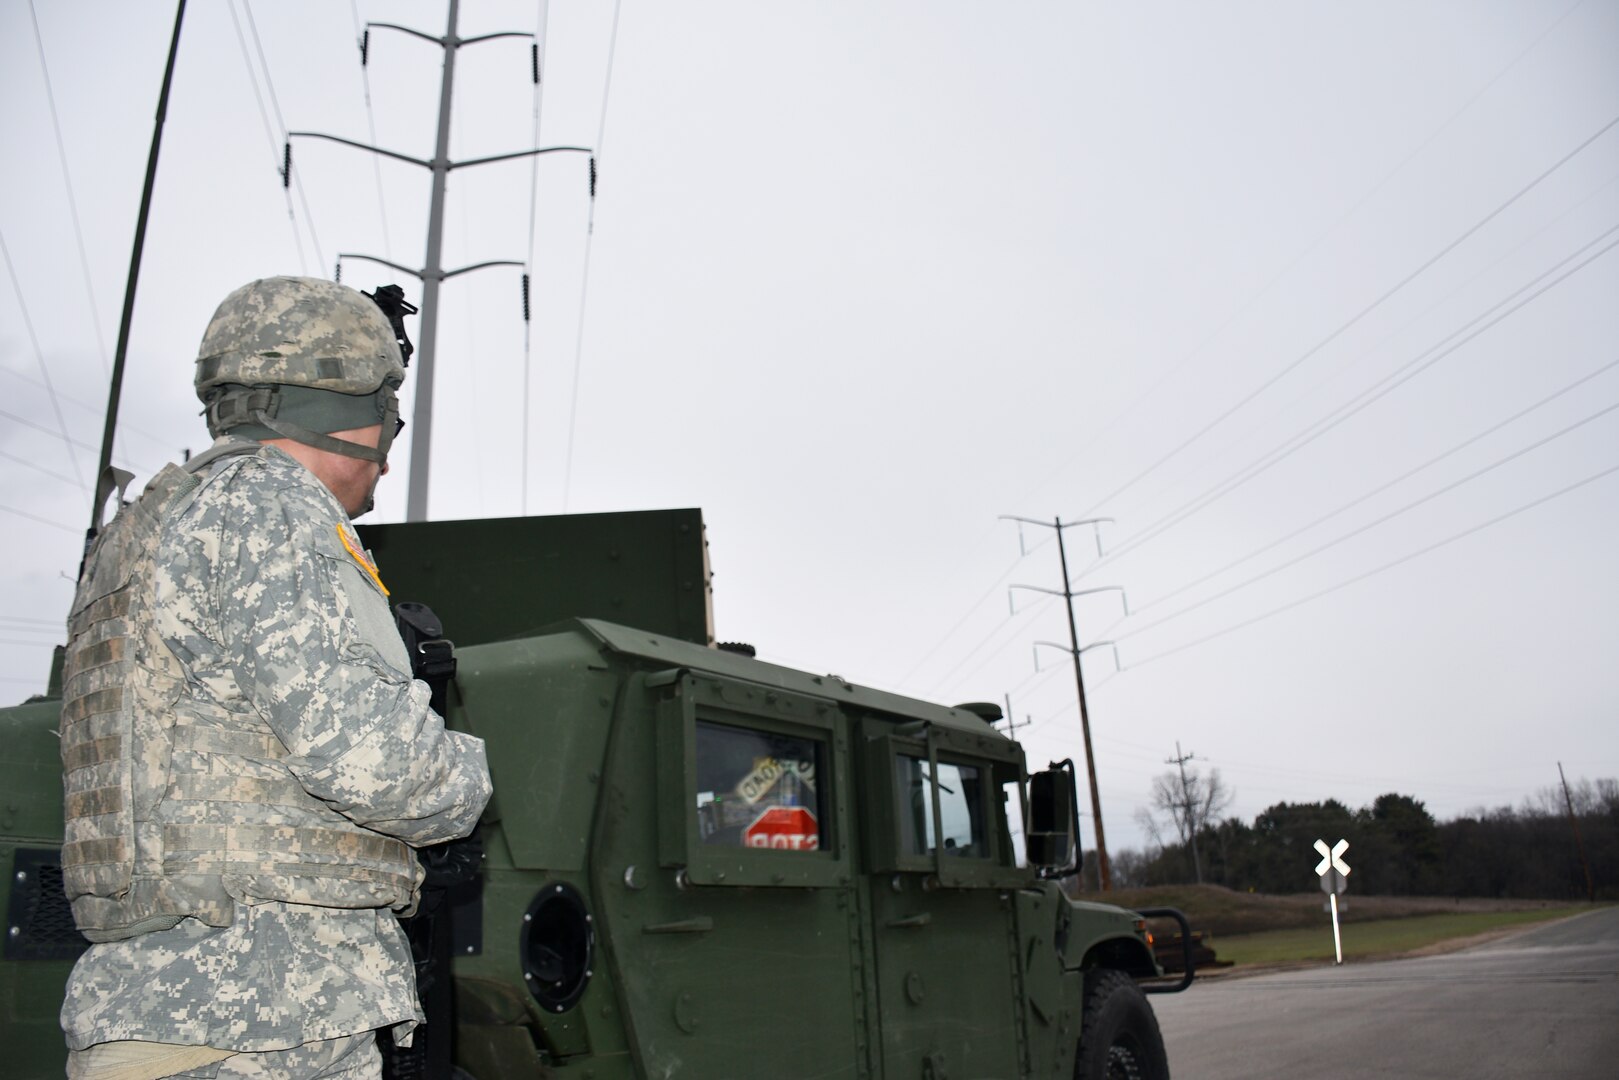 Power exercise builds partnerships in Wis.